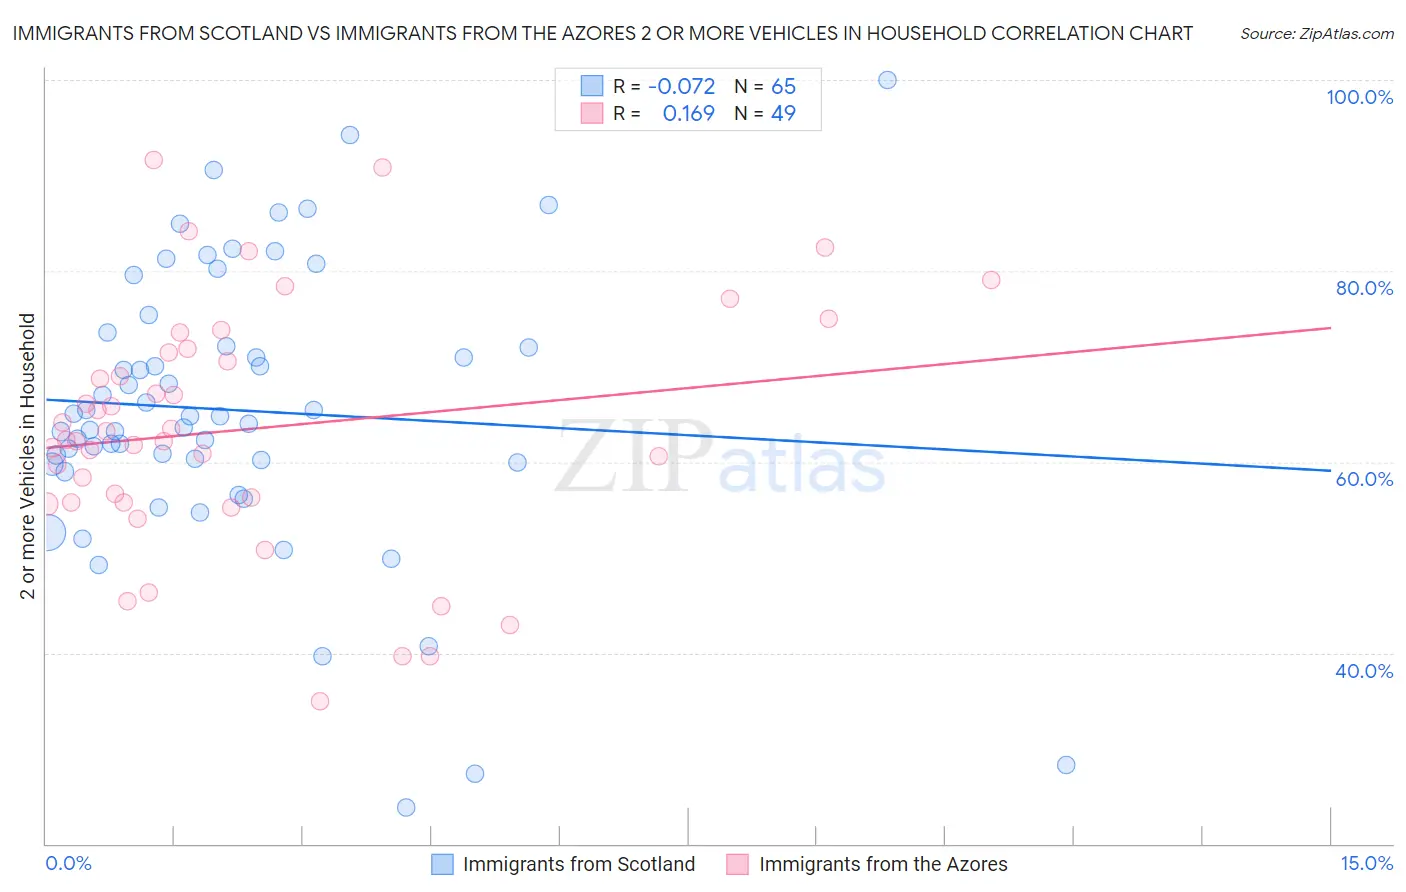 Immigrants from Scotland vs Immigrants from the Azores 2 or more Vehicles in Household